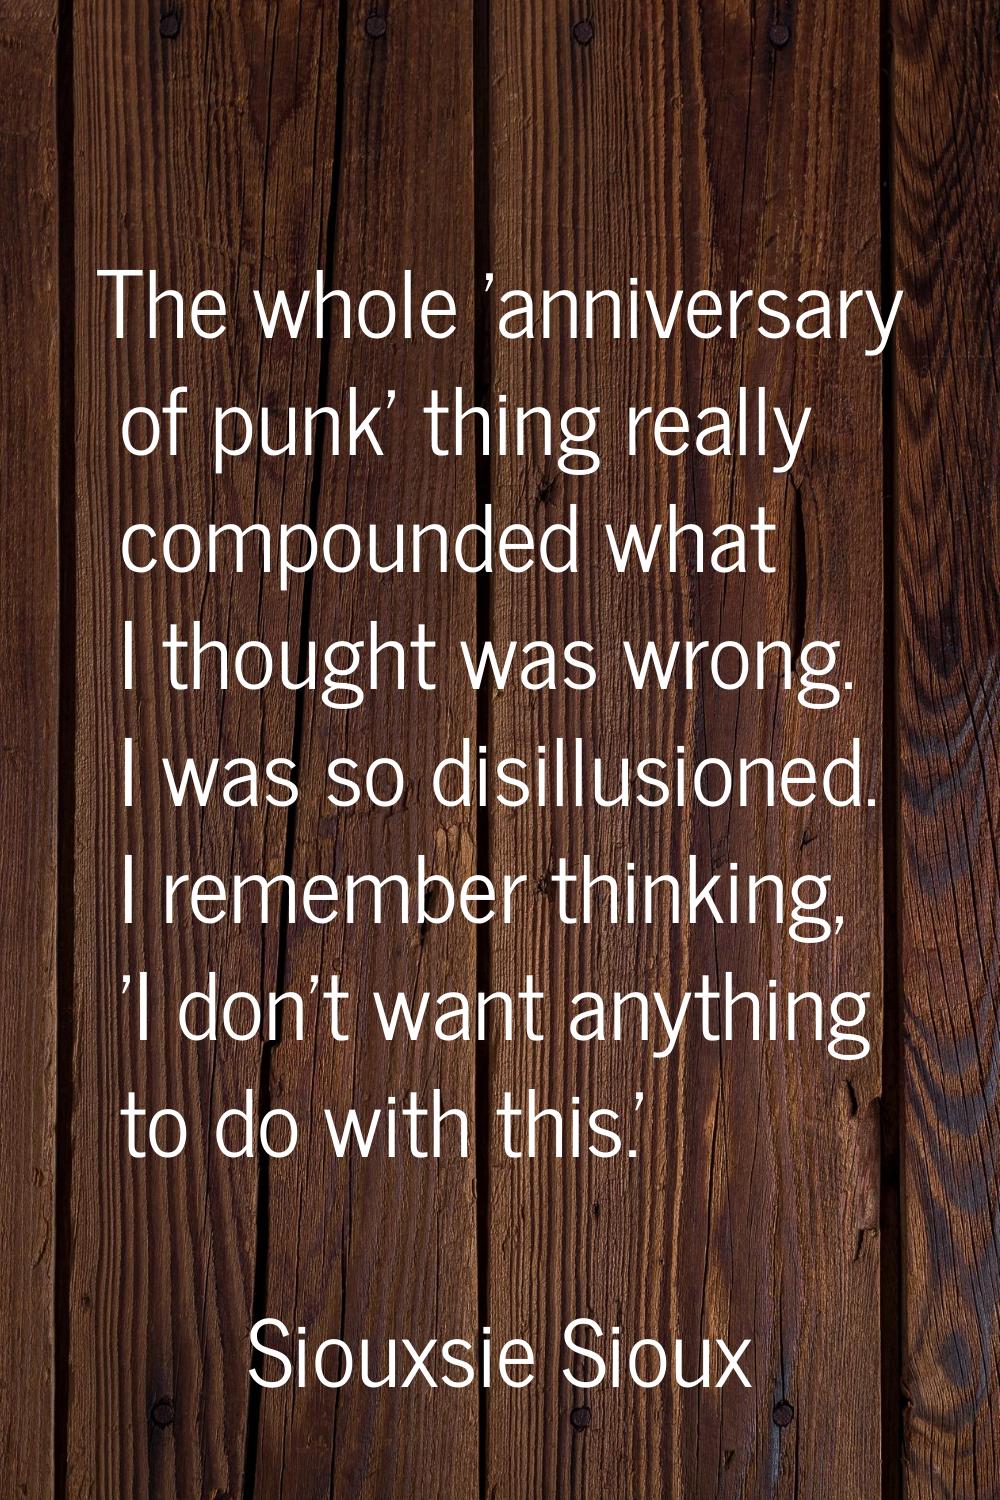 The whole 'anniversary of punk' thing really compounded what I thought was wrong. I was so disillus